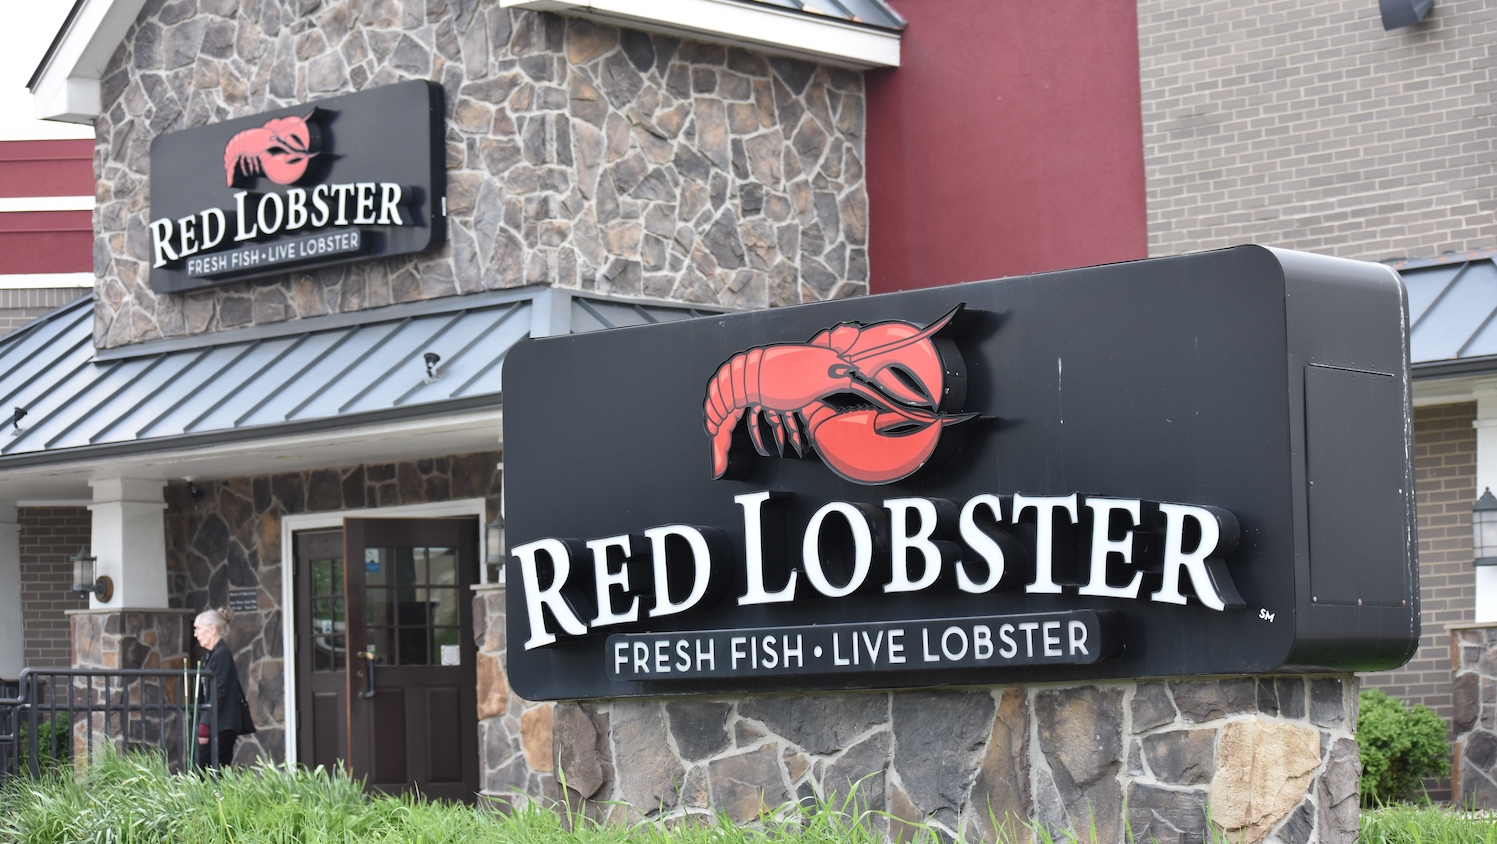 The exterior of a Red Lobster restaurant